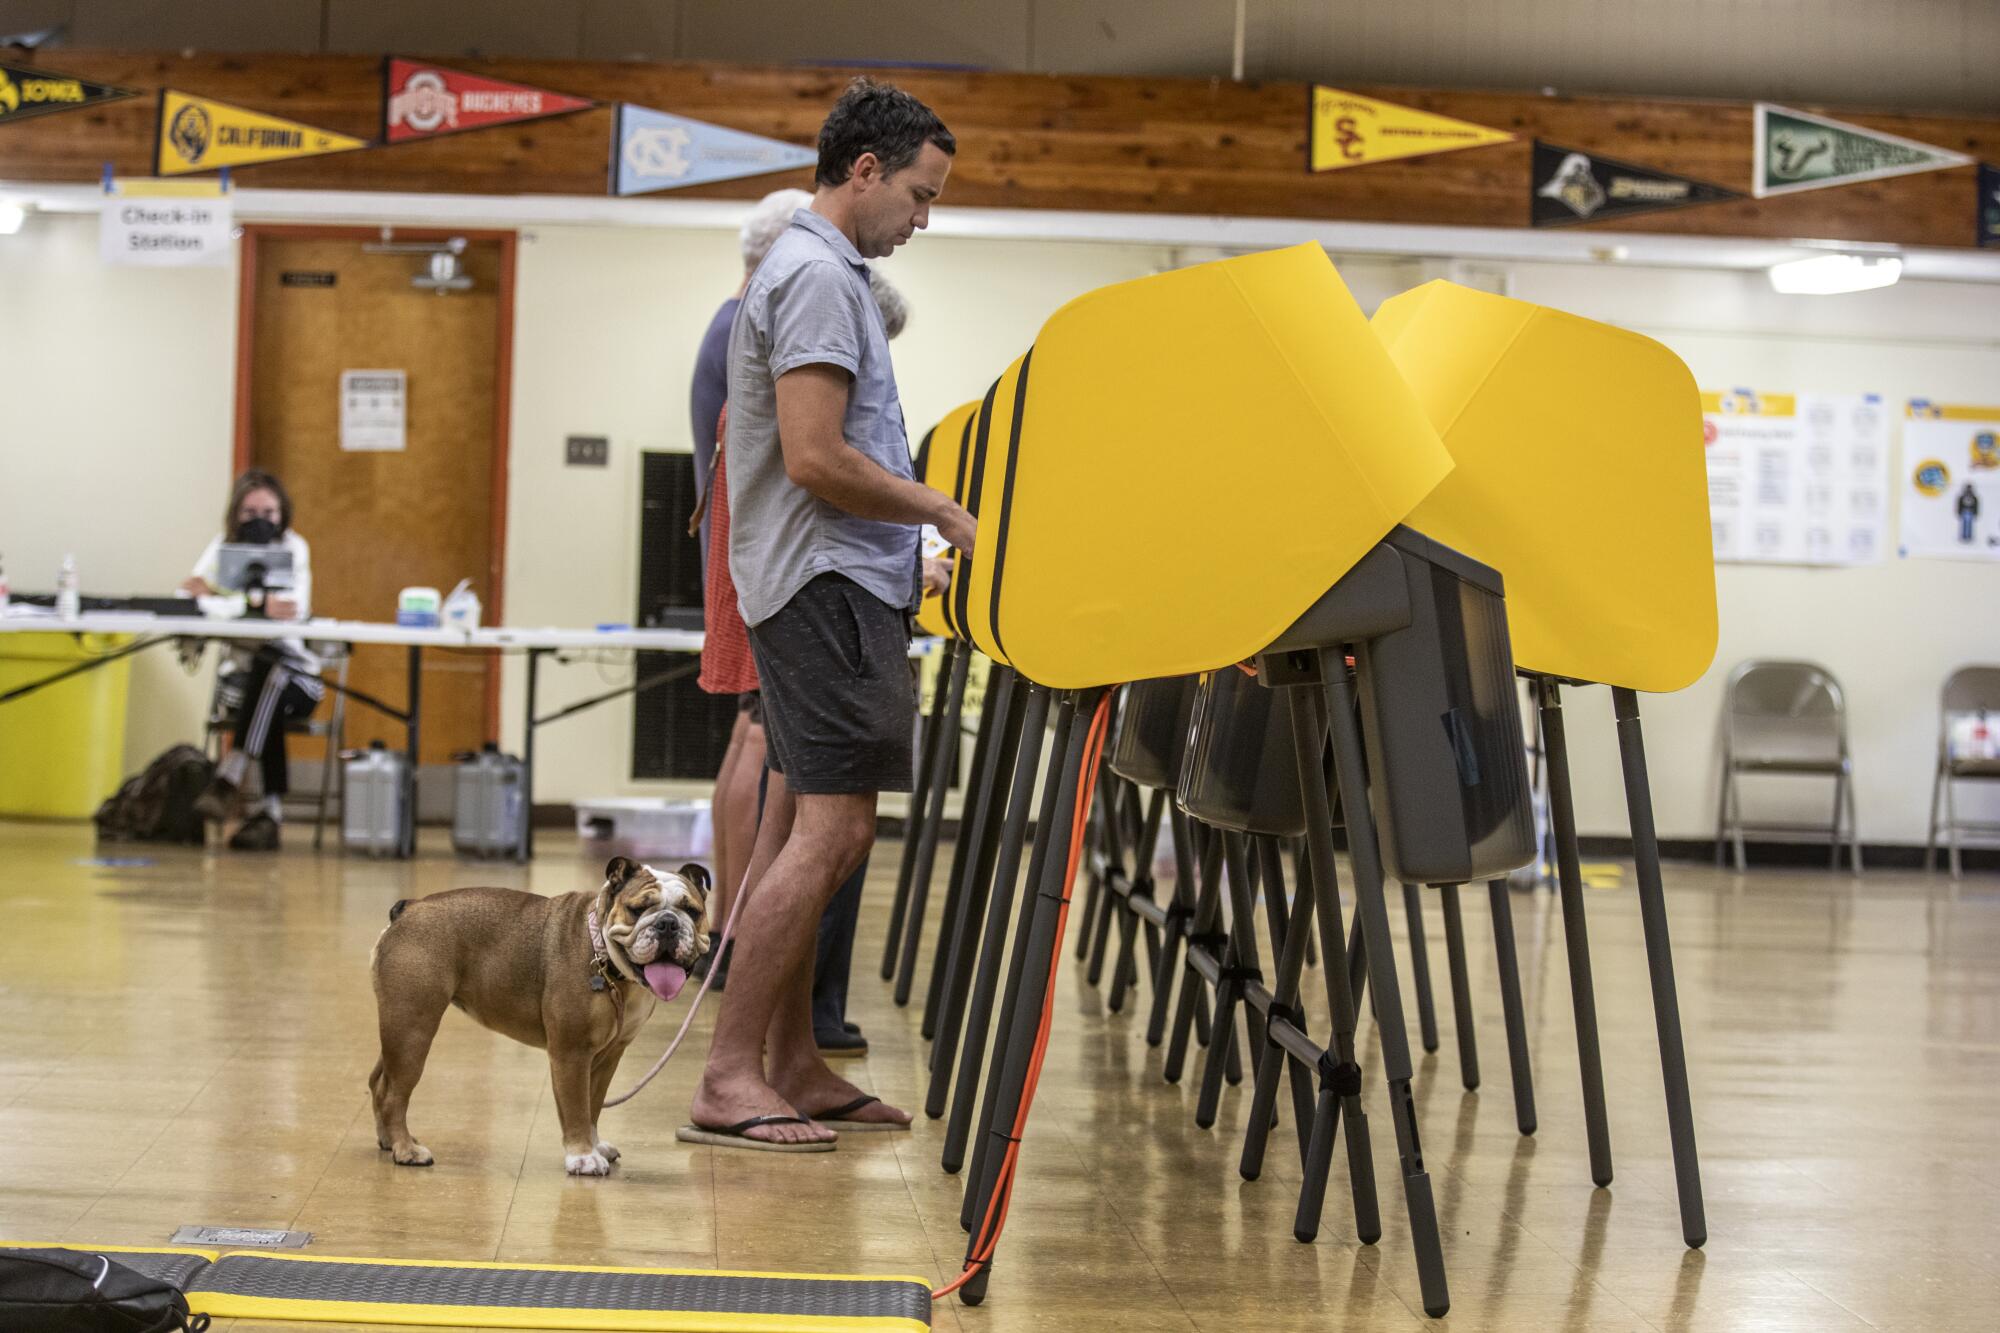 Cameron Porsandeh votes as his bulldog stands by